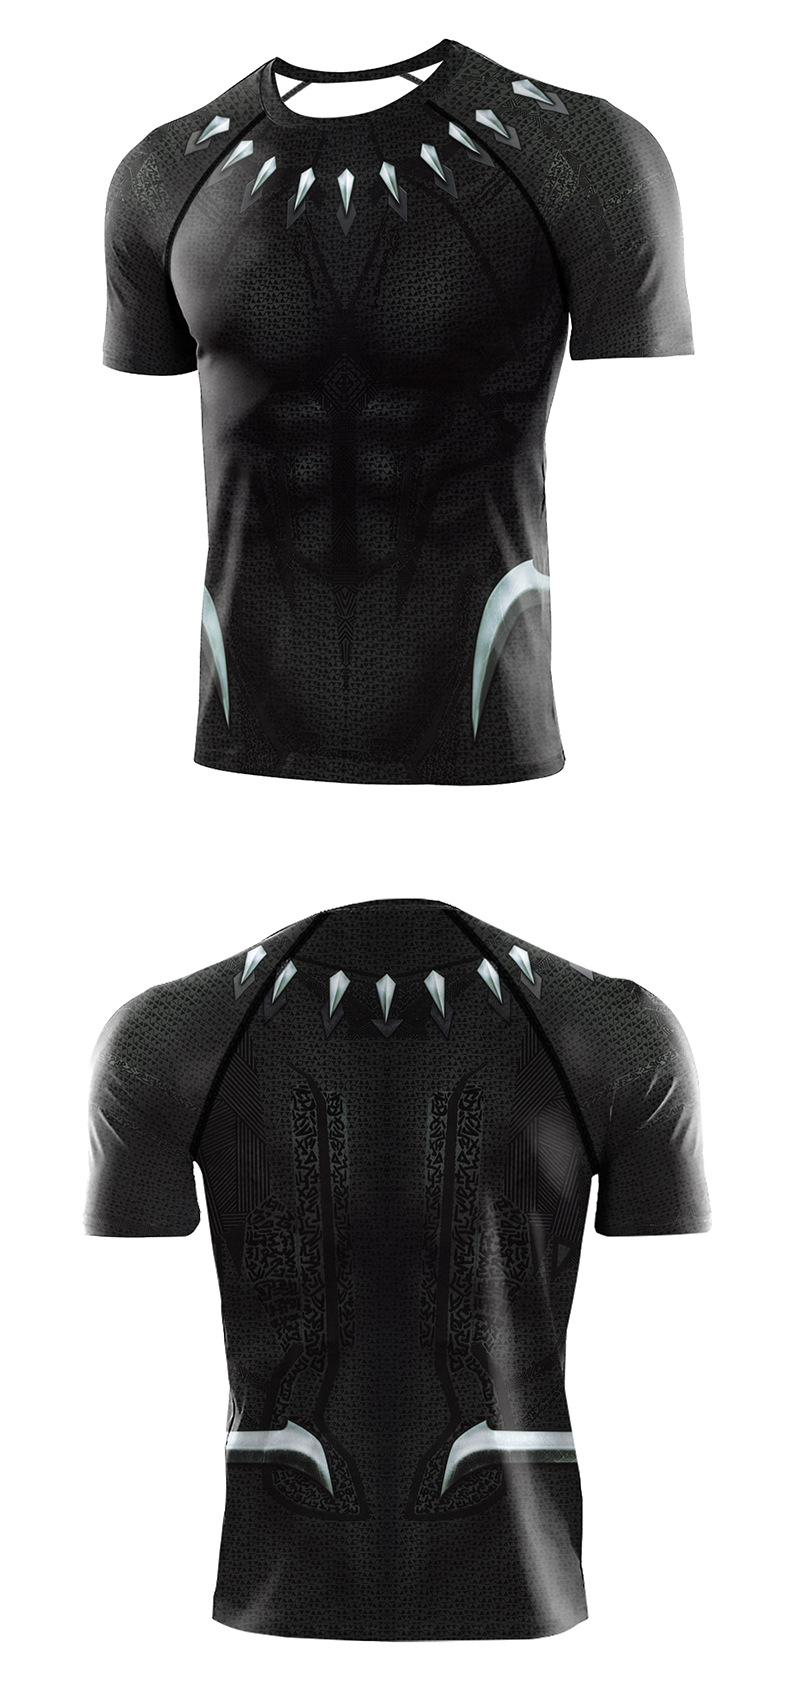 black panther movie costume shirt short sleeve -front and back